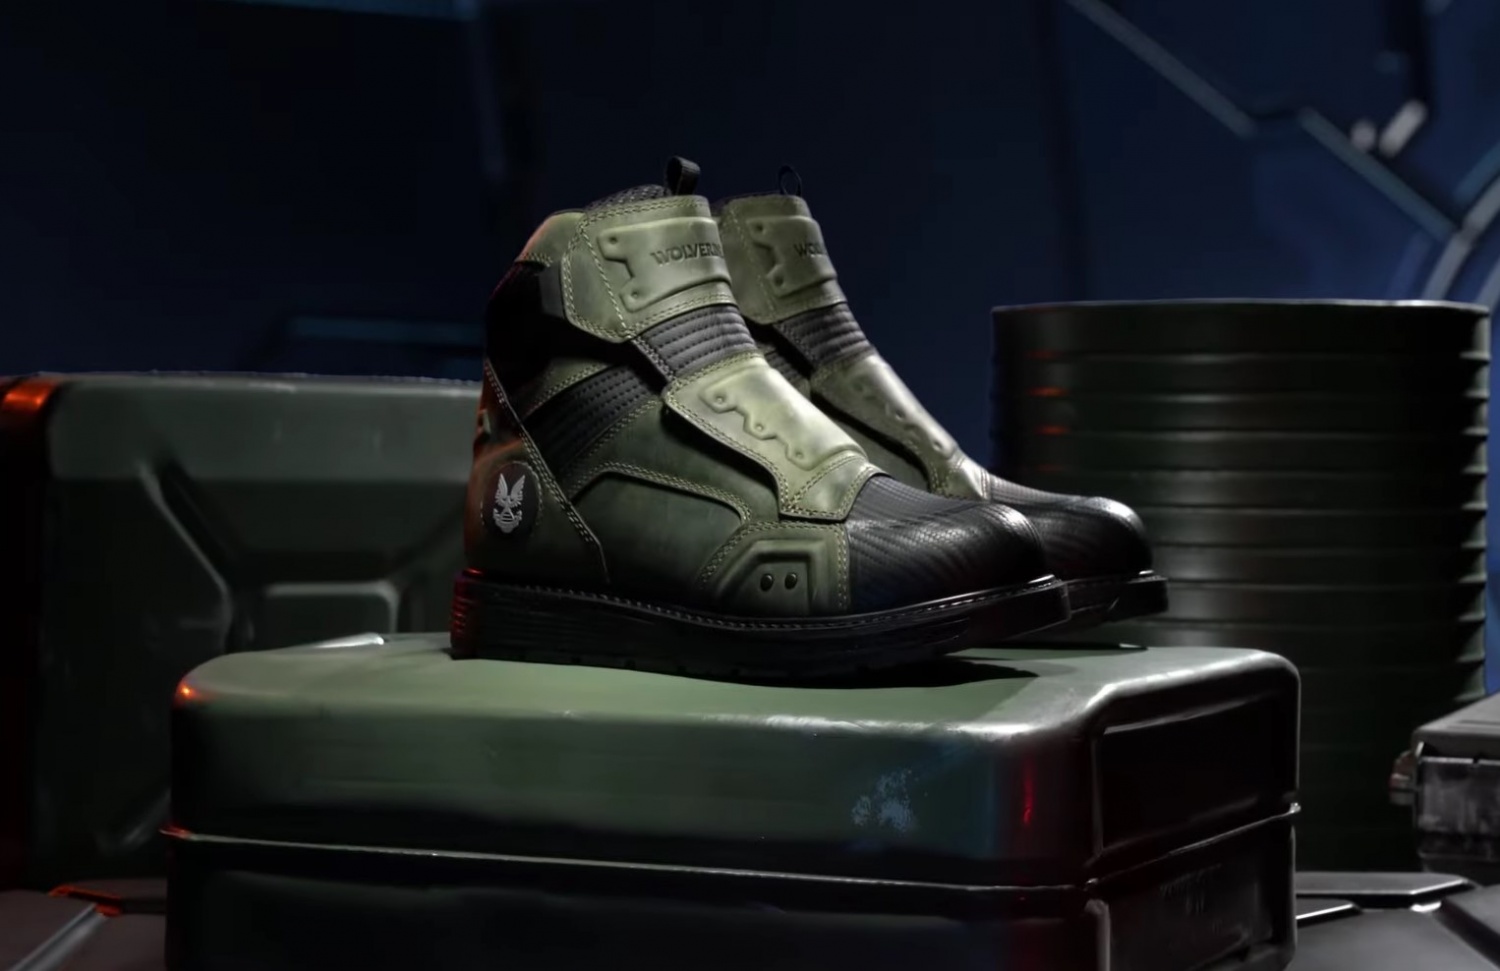 halo master chief boots